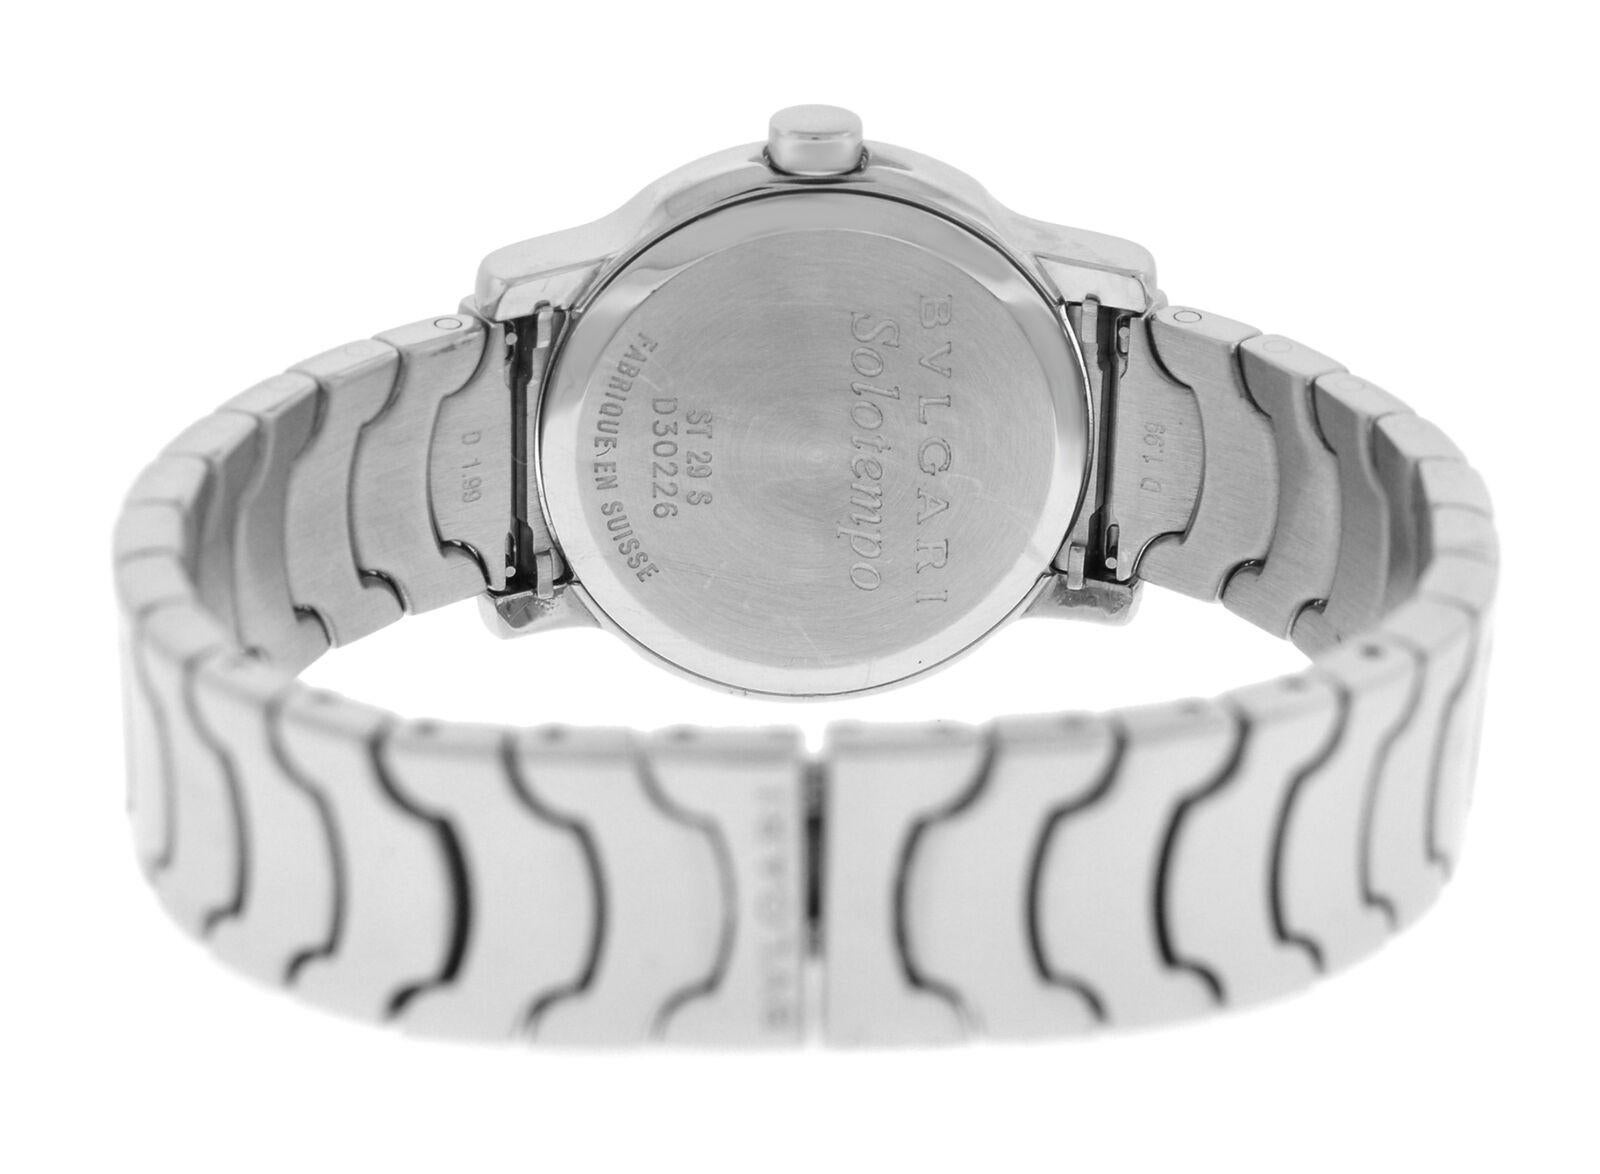 Women's Ladies Bvlgari Solotempo ST29S Stainless Steel Date Quartz Watch For Sale